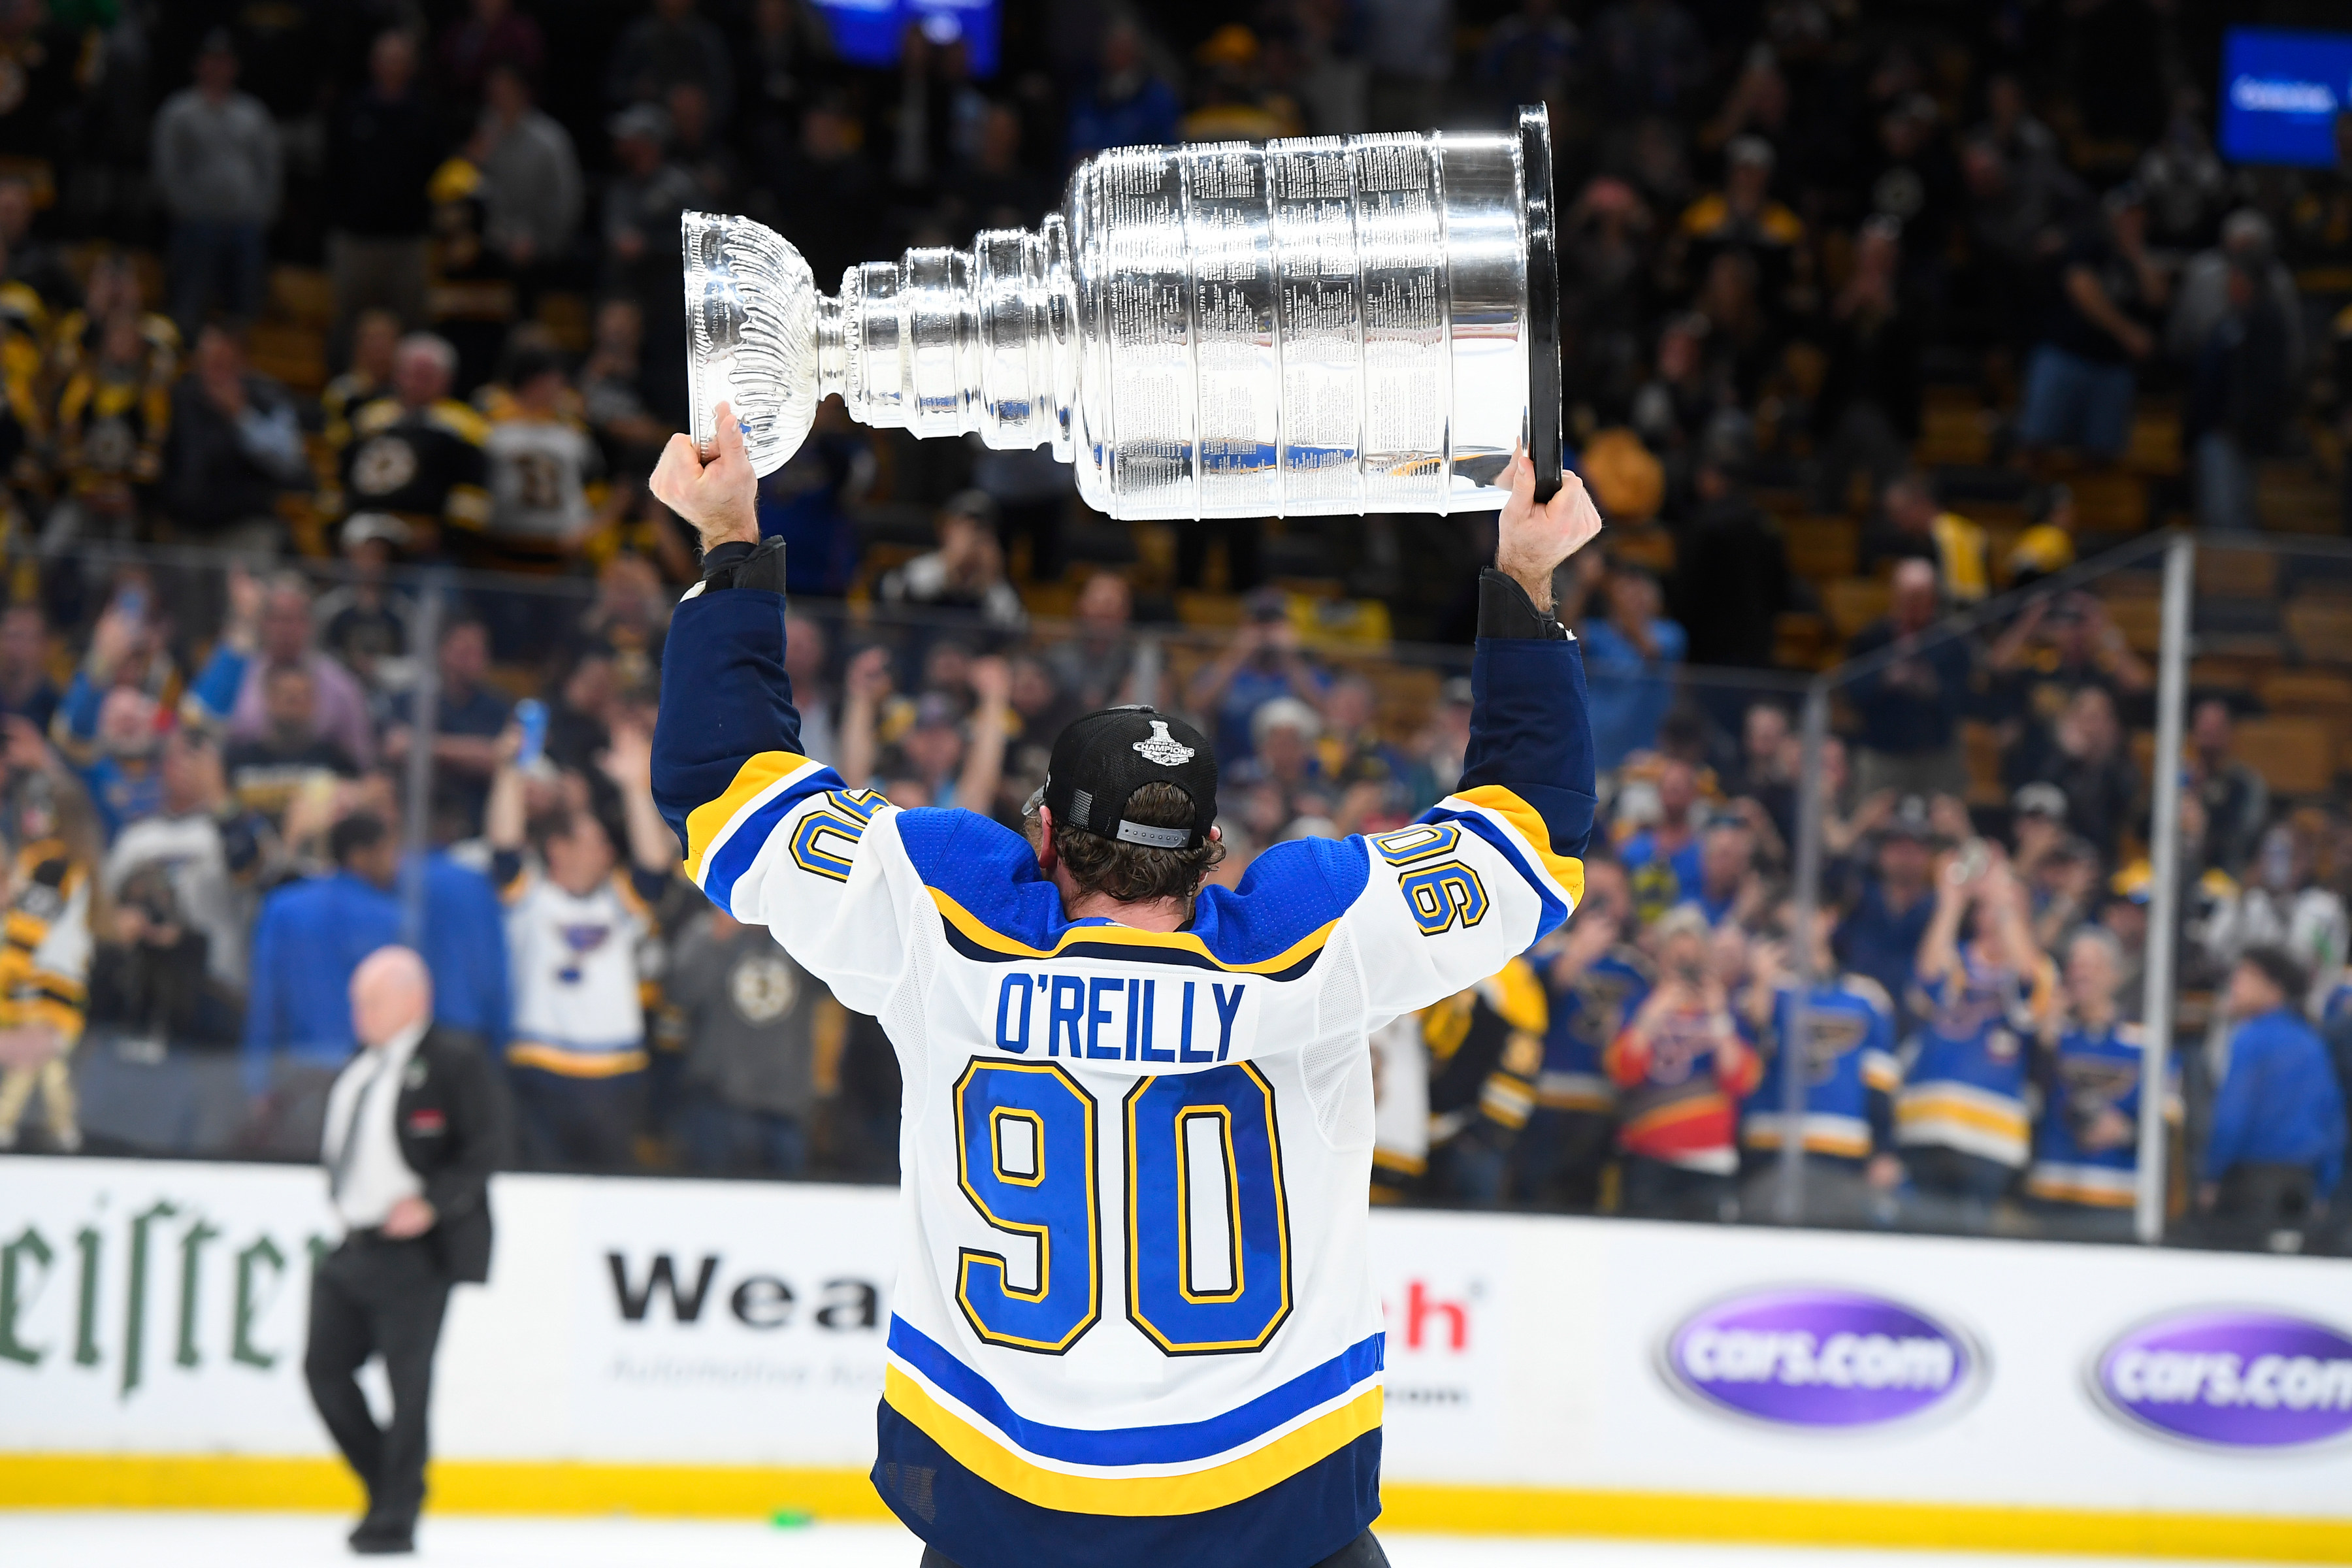 St. Louis Blues Win Game 7, Claim First Stanley Cup in Franchise History.